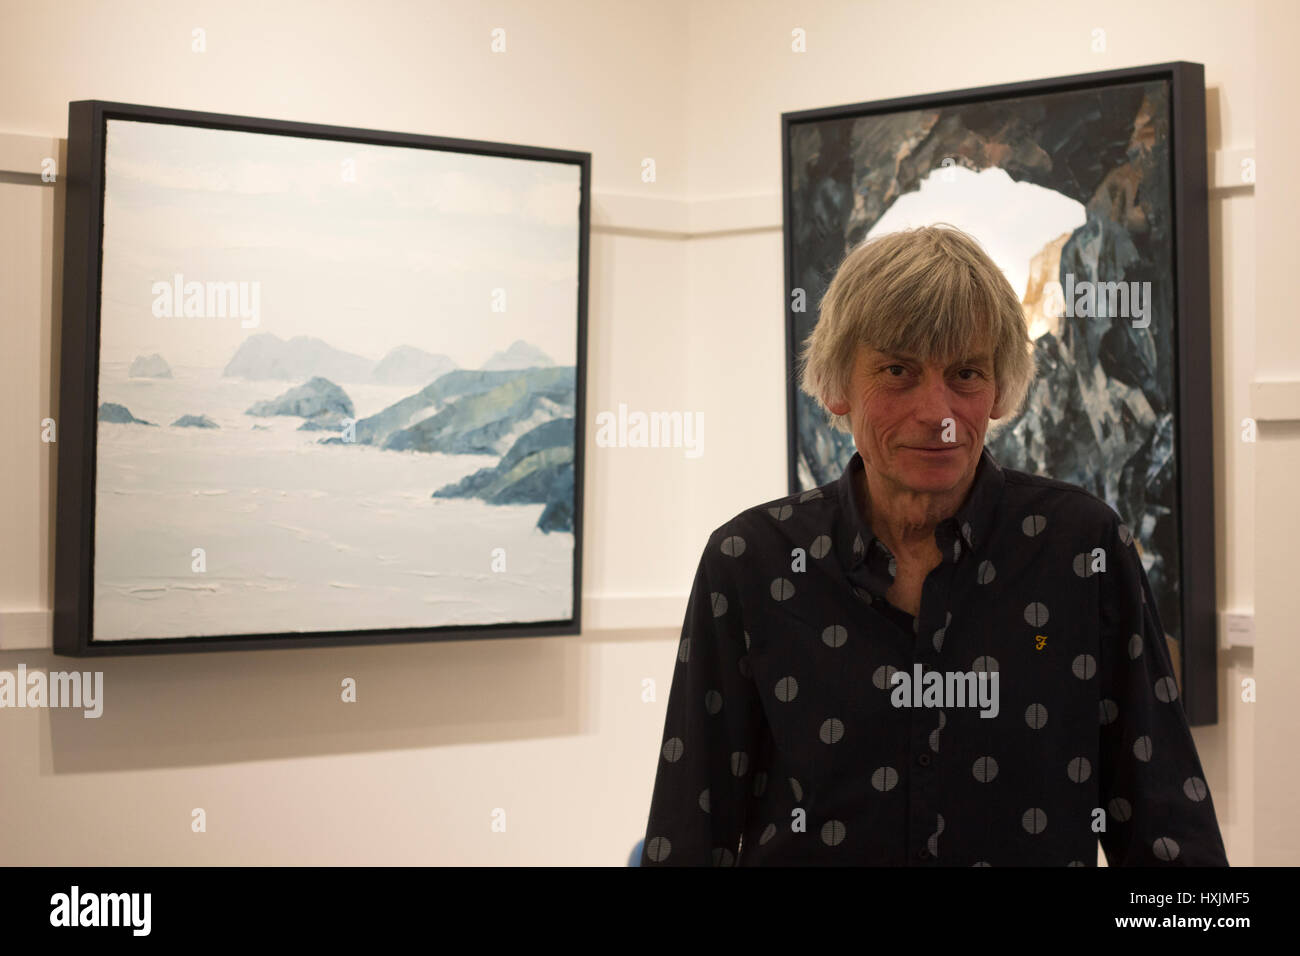 Gwyn Roberts at his gallery in Catays Cardiff. Welsh scenery is the subject of Gwyn Roberts’ latest exhibition at The Albany Gallery, Cardiff-16 March 2017 - 8 April 2017 ,10:00 - 17:00.  @ellageen Stock Photo